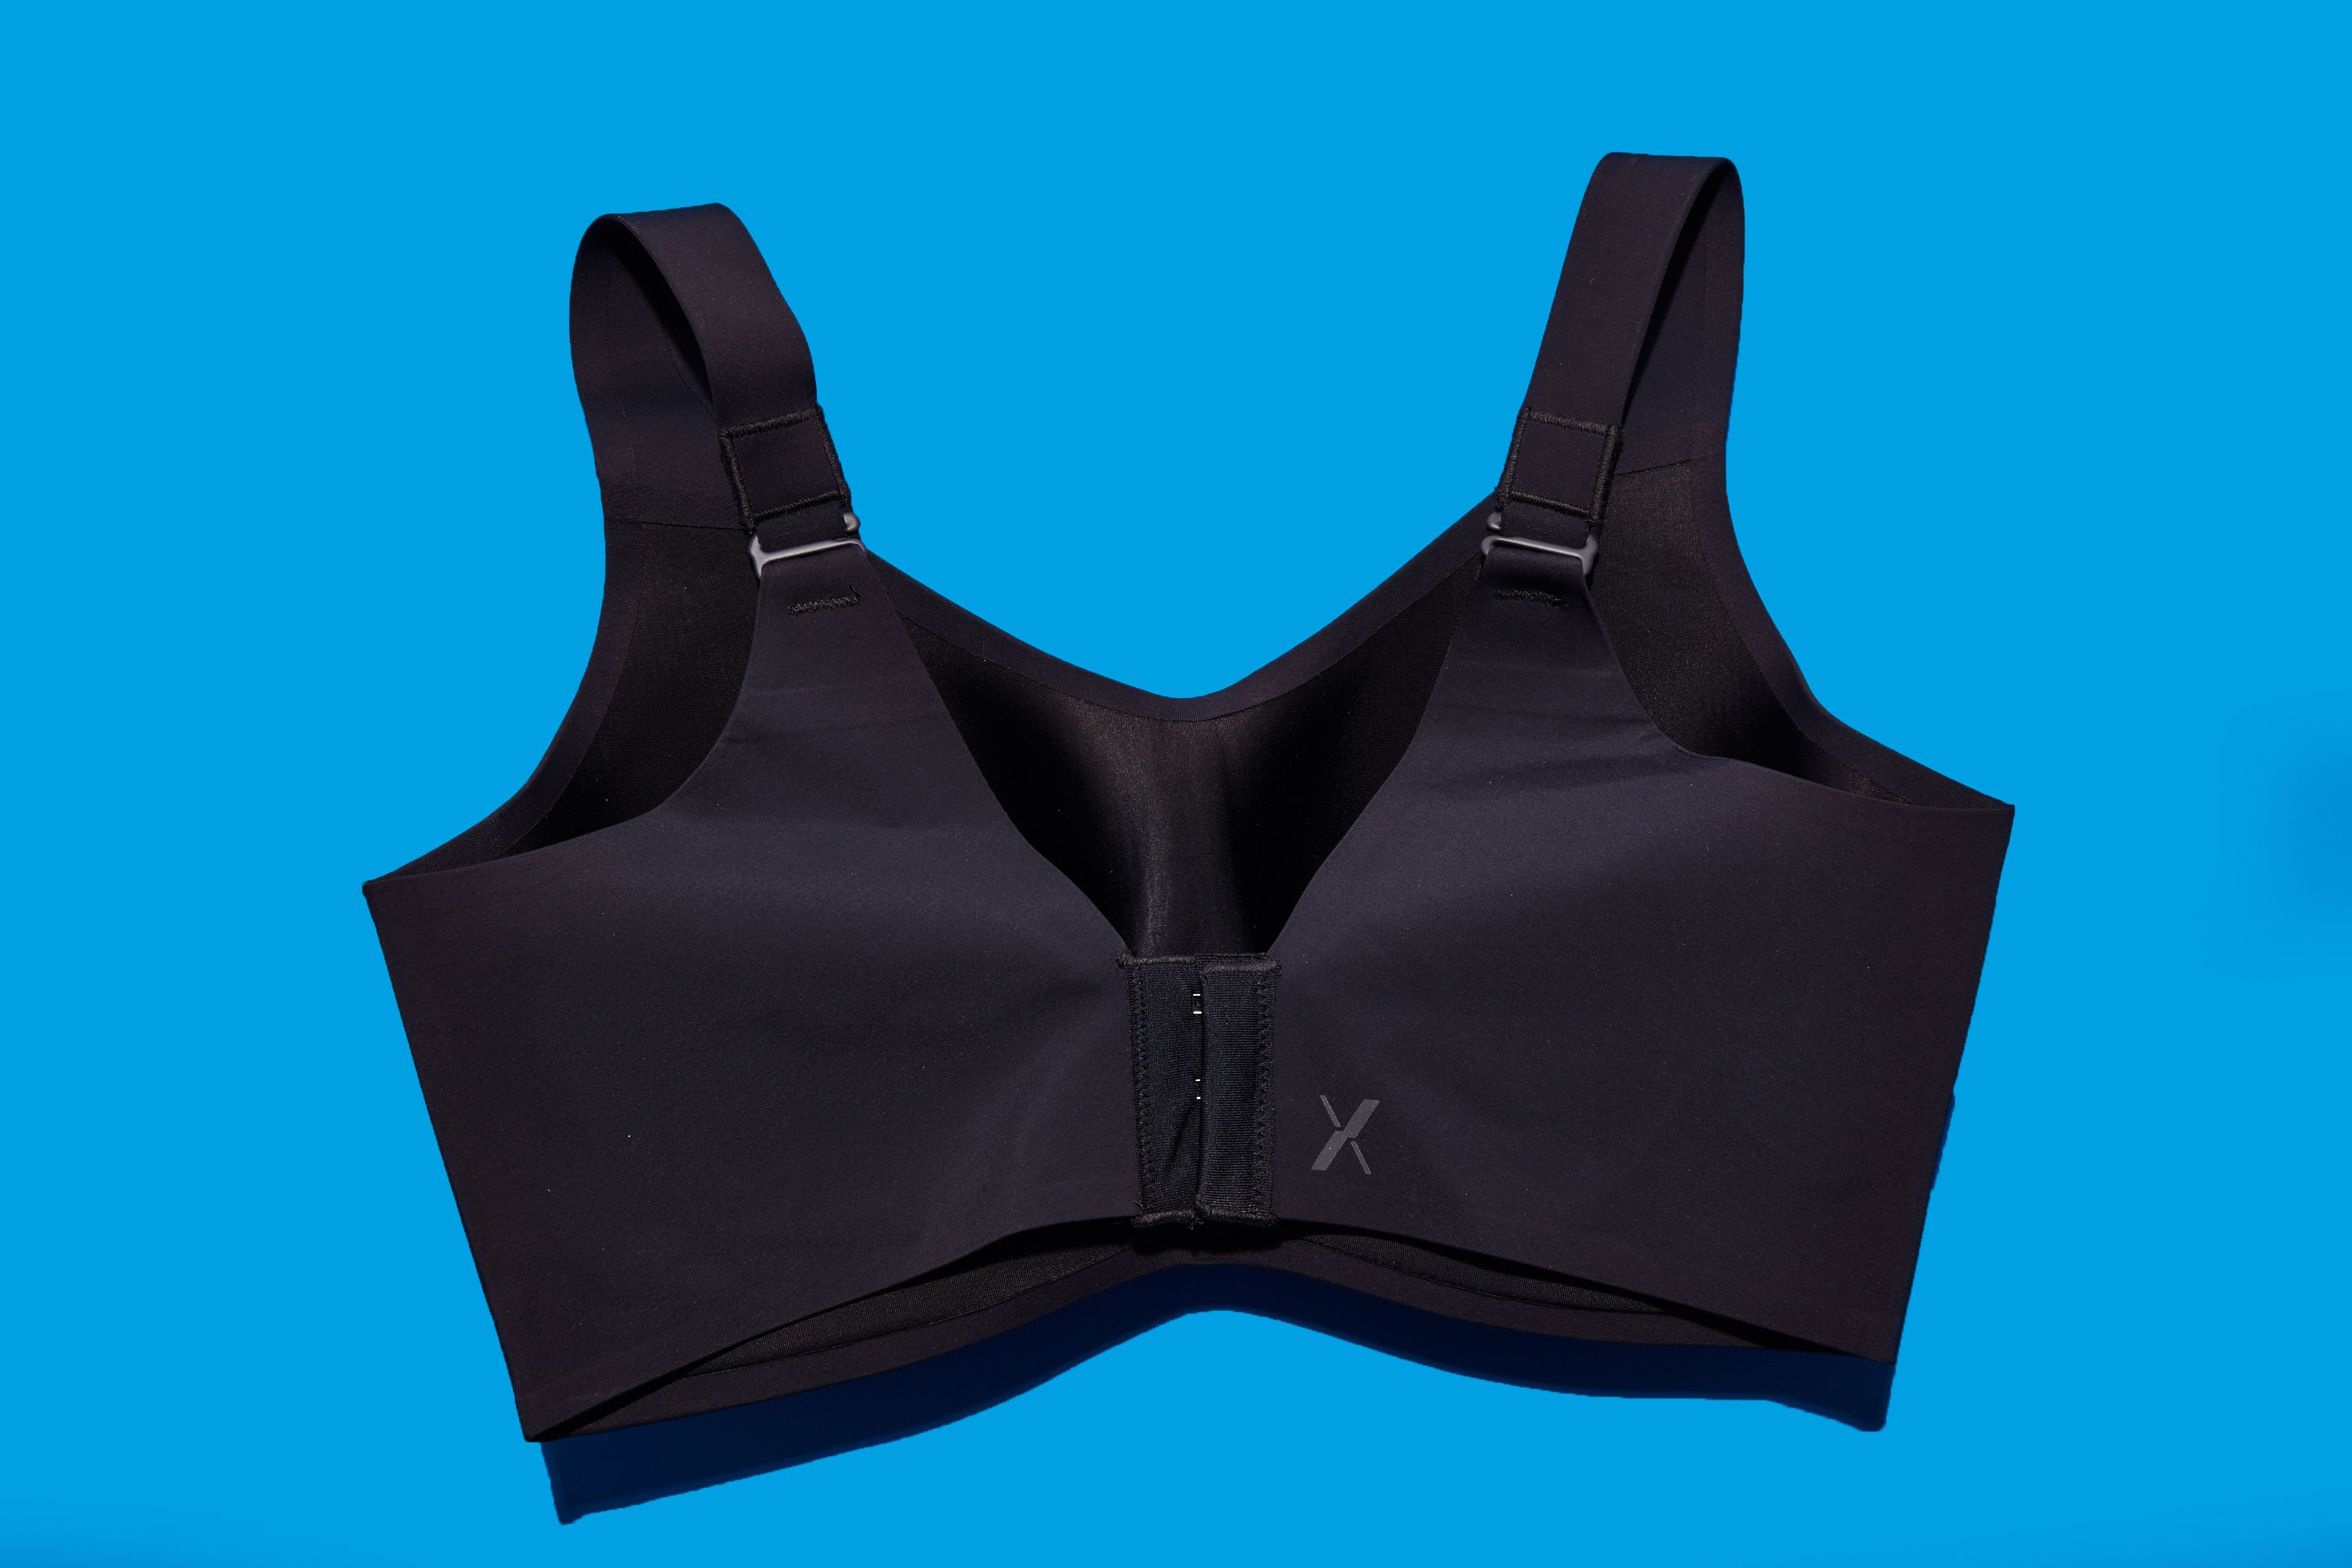 We Tested the All-Inclusive Knix Catalyst Sports Bra